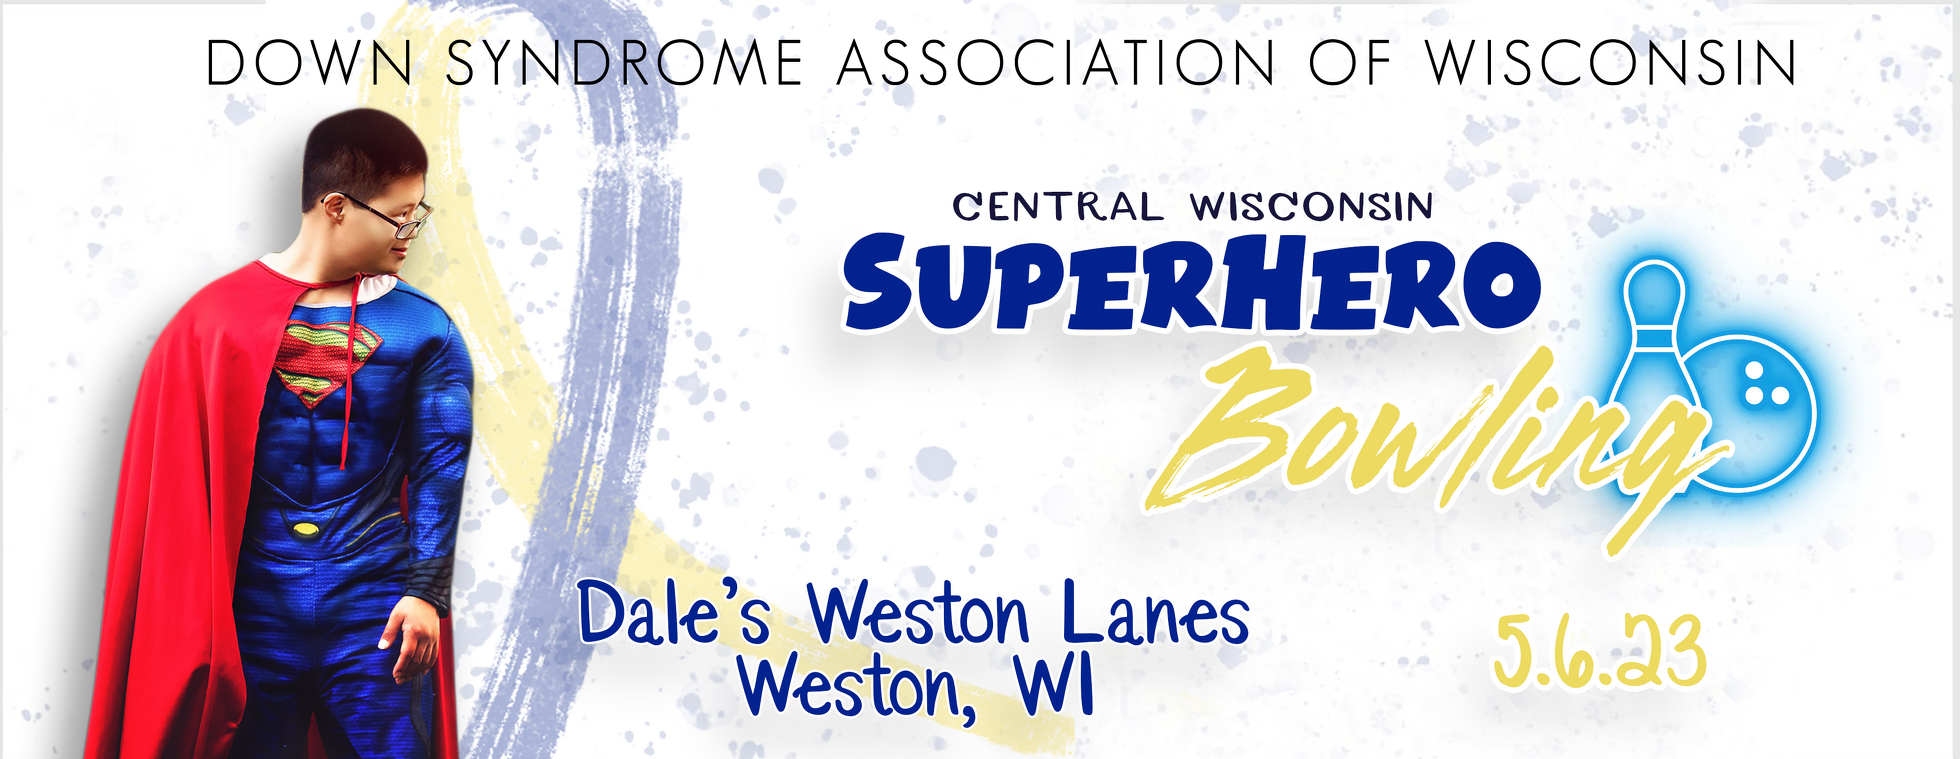 Annual Central Wisconsin Down Syndrome Awareness Superhero Bowling Event